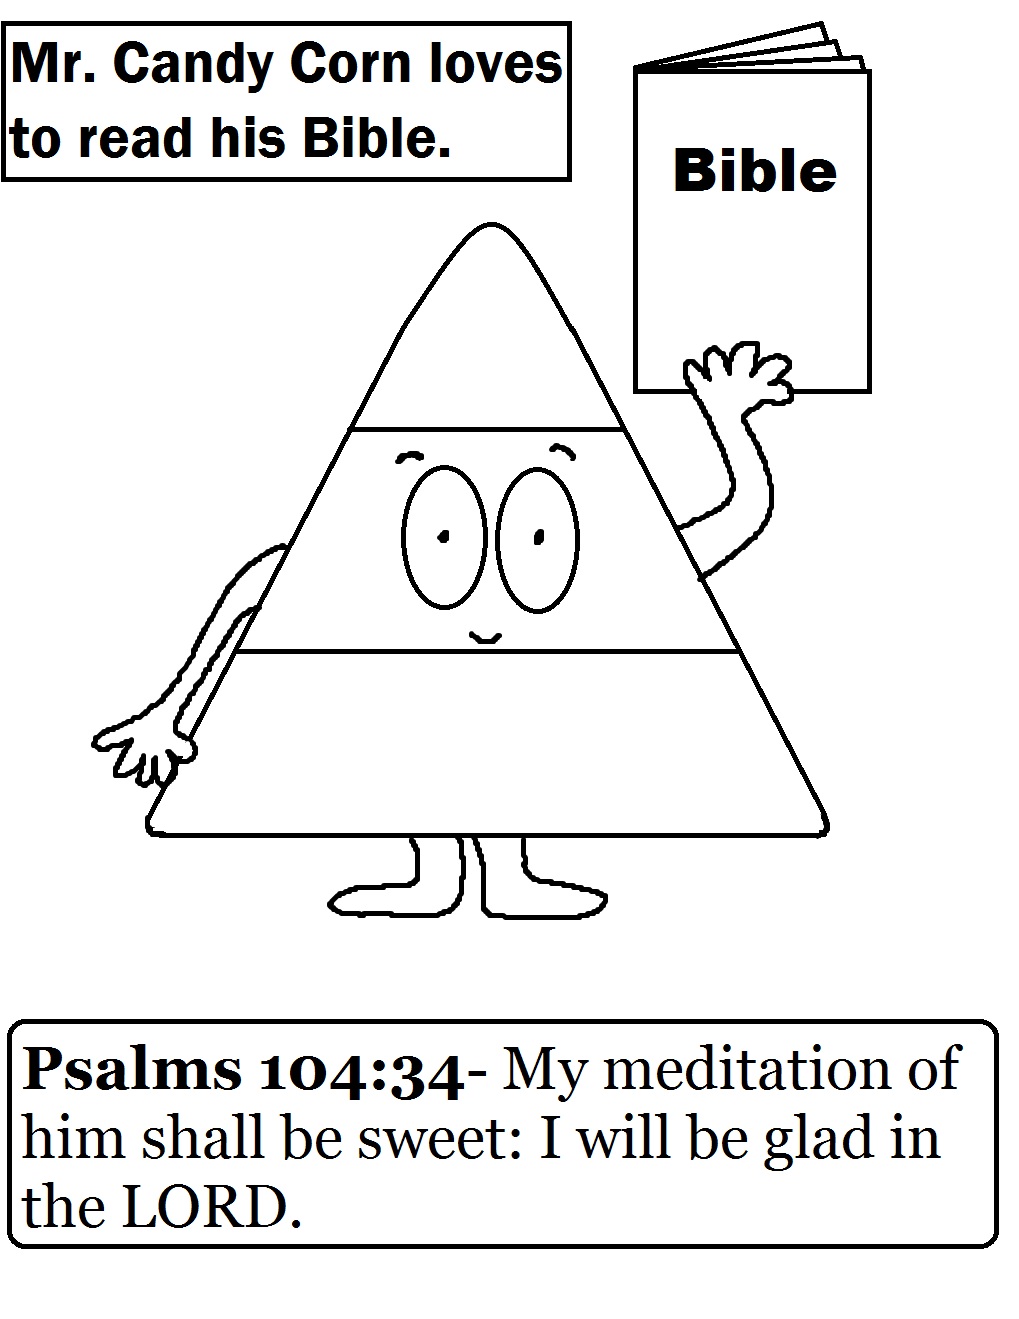 Free Candy Corn Sunday School Coloring Page printable version